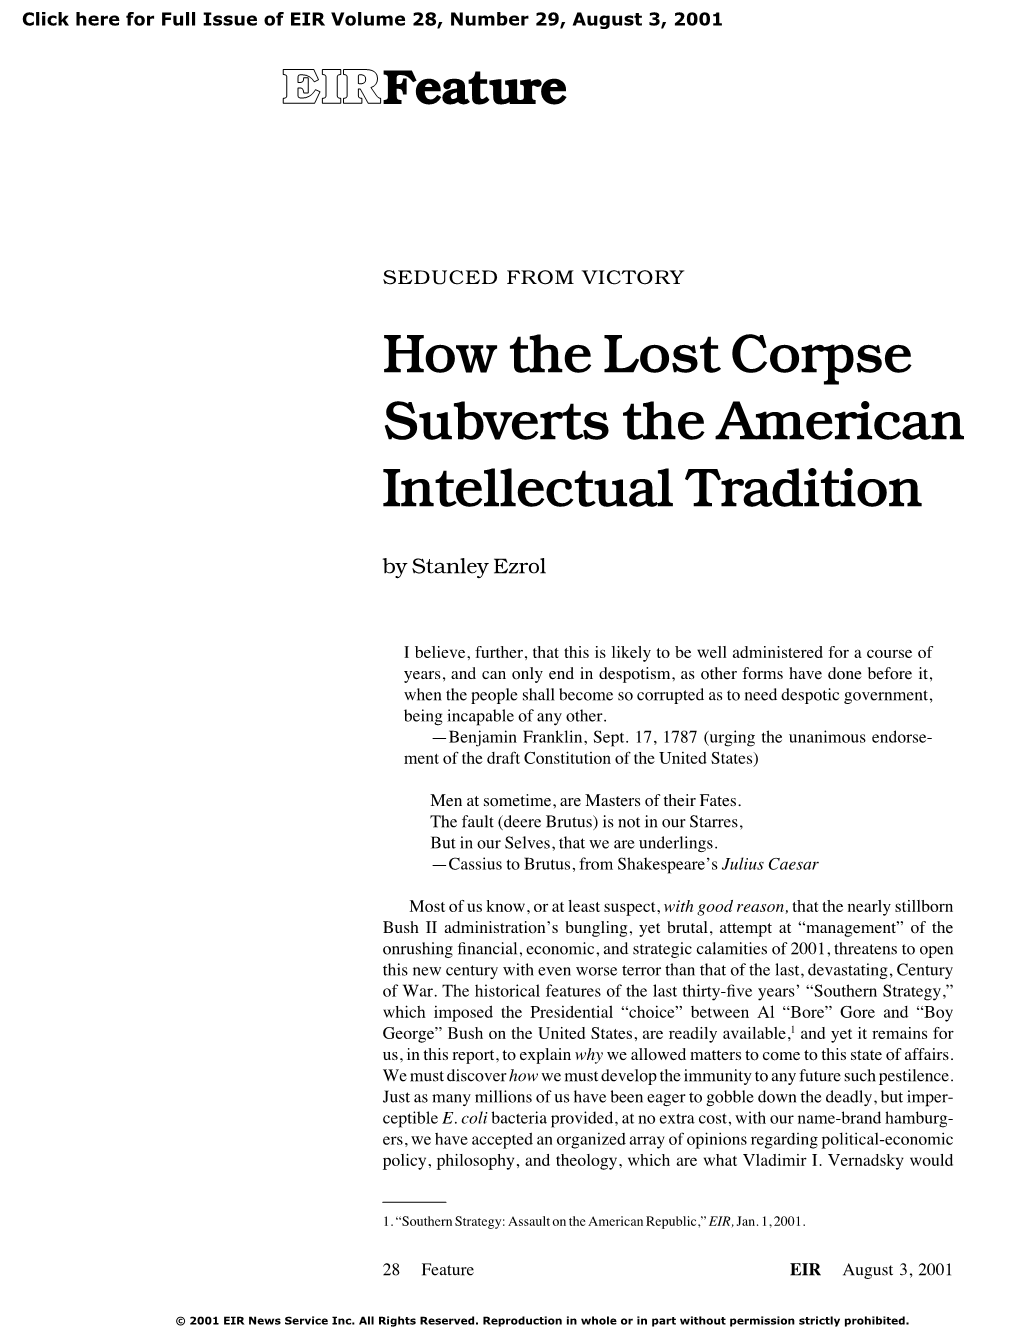 SEDUCED from VICTORY How the Lost Corpse Subverts the American Intellectual Tradition